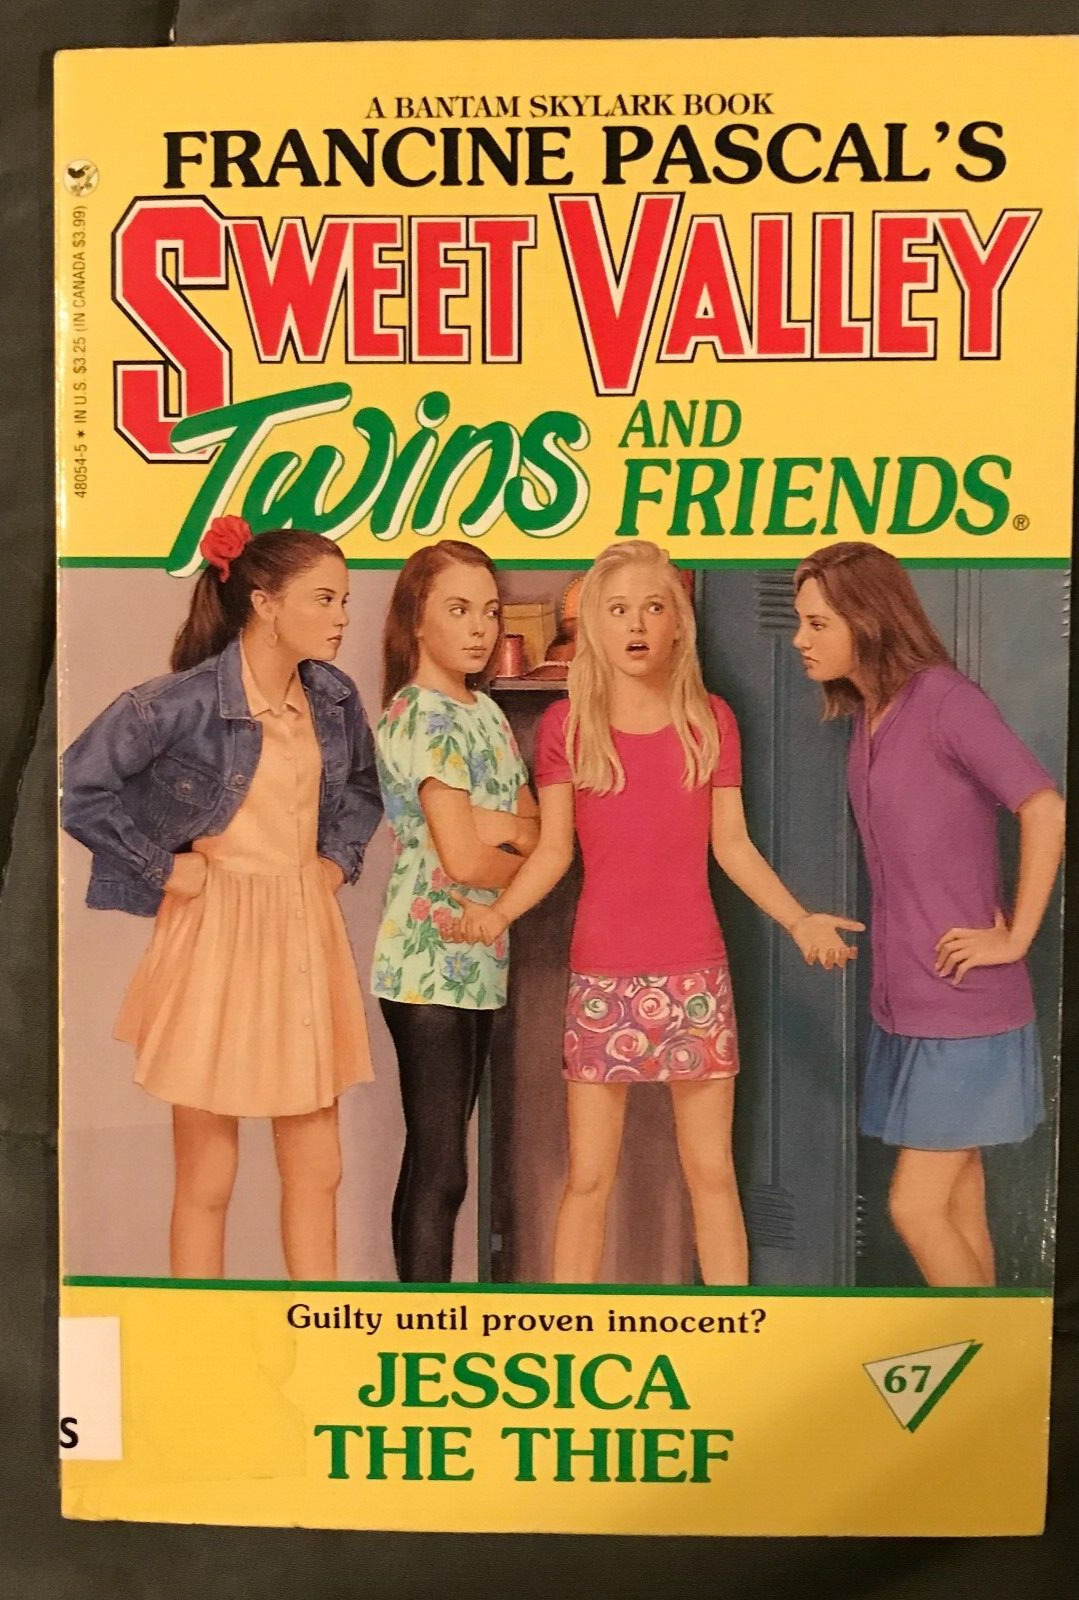 Jessica the Thief #67 SWEET VALLEY TWINS (Francine Pascal, 1993) preteen series